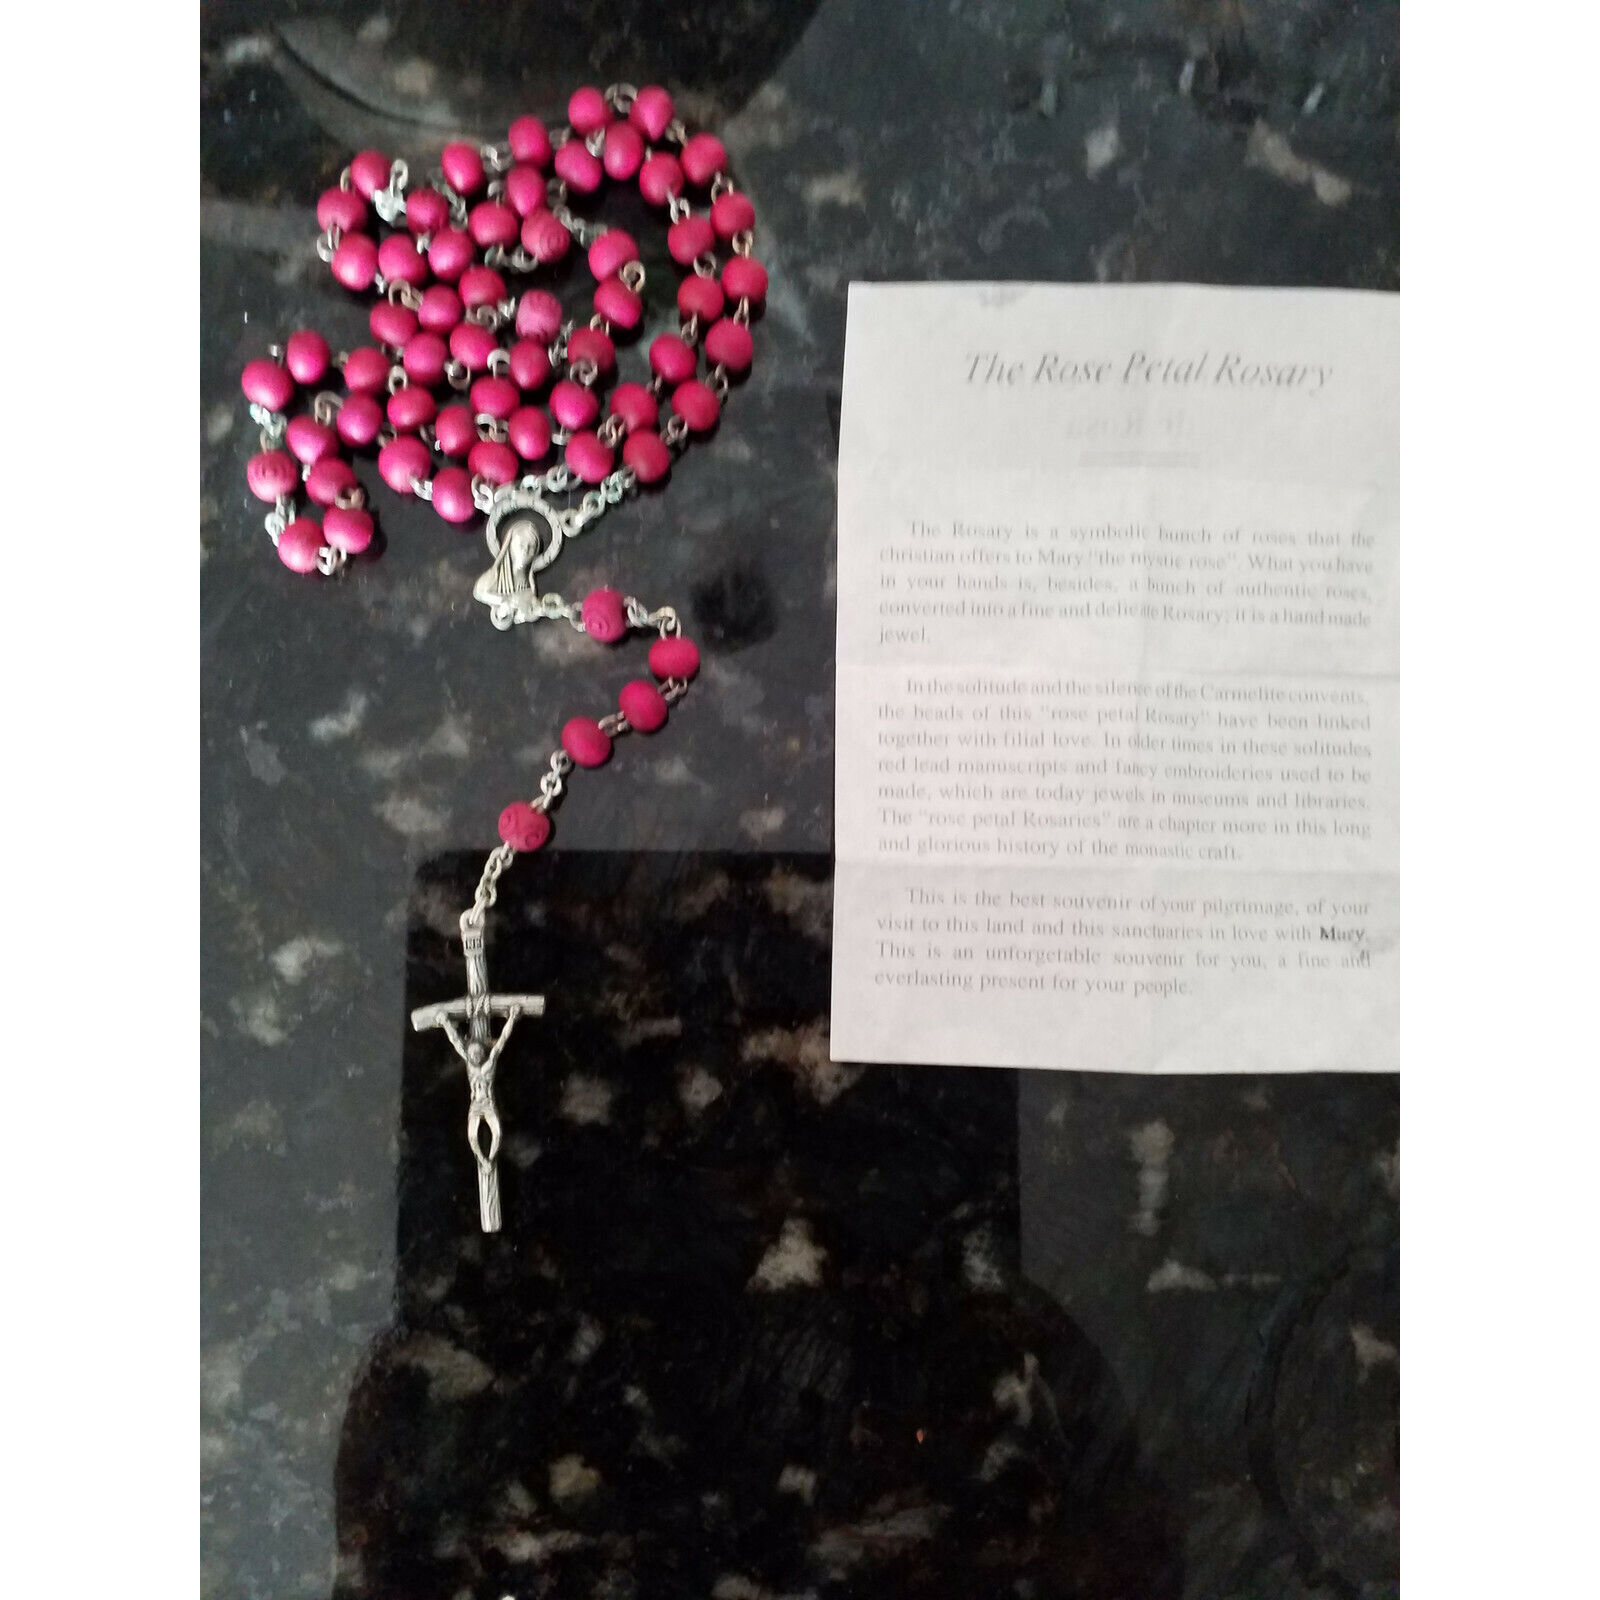 BLESSED BY ST. POPE JOHN PAUL II - Rare Vintage Red Rosary from Vatican City